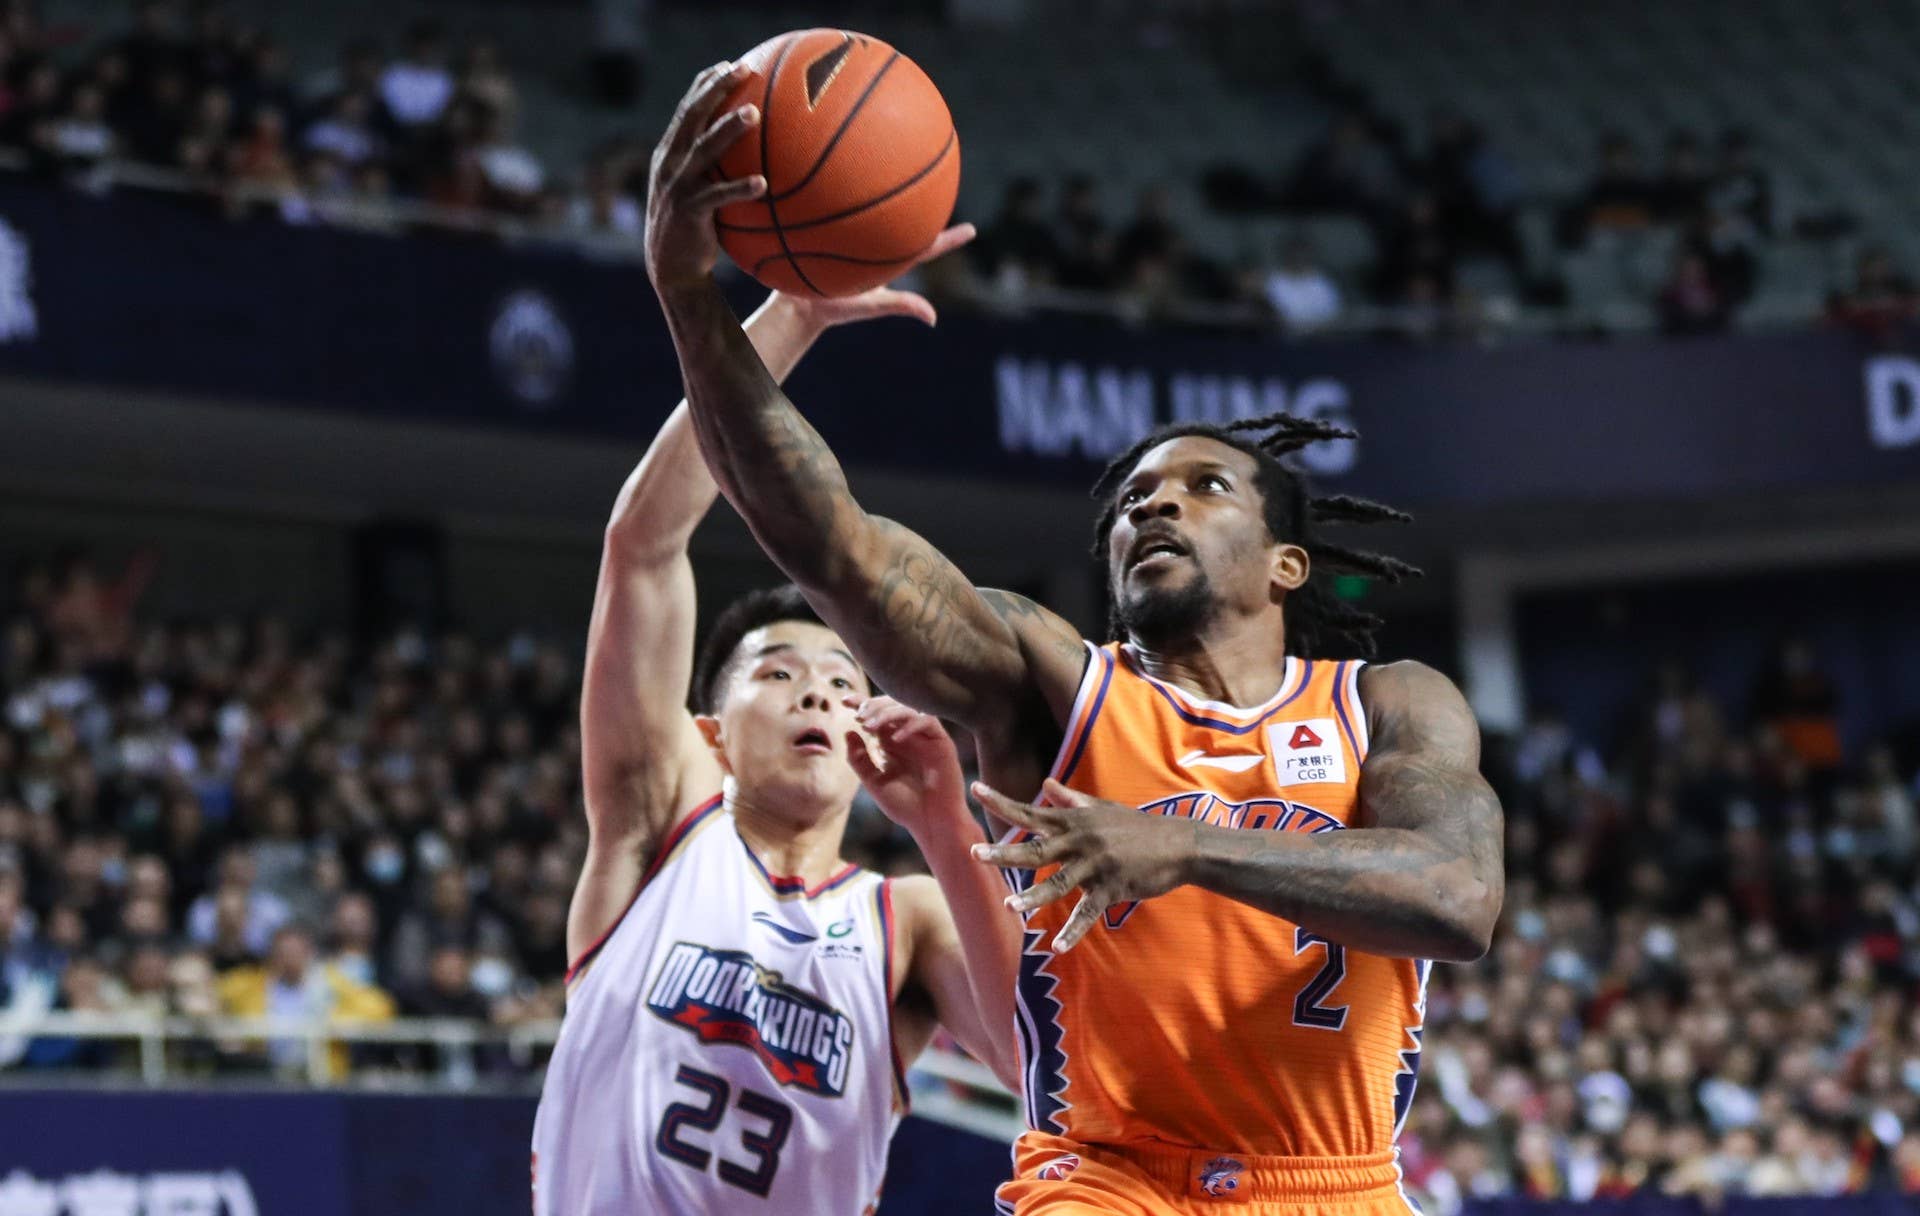 Shanghai Sharks point guard Eric Bledsoe during the team's recent playoff game